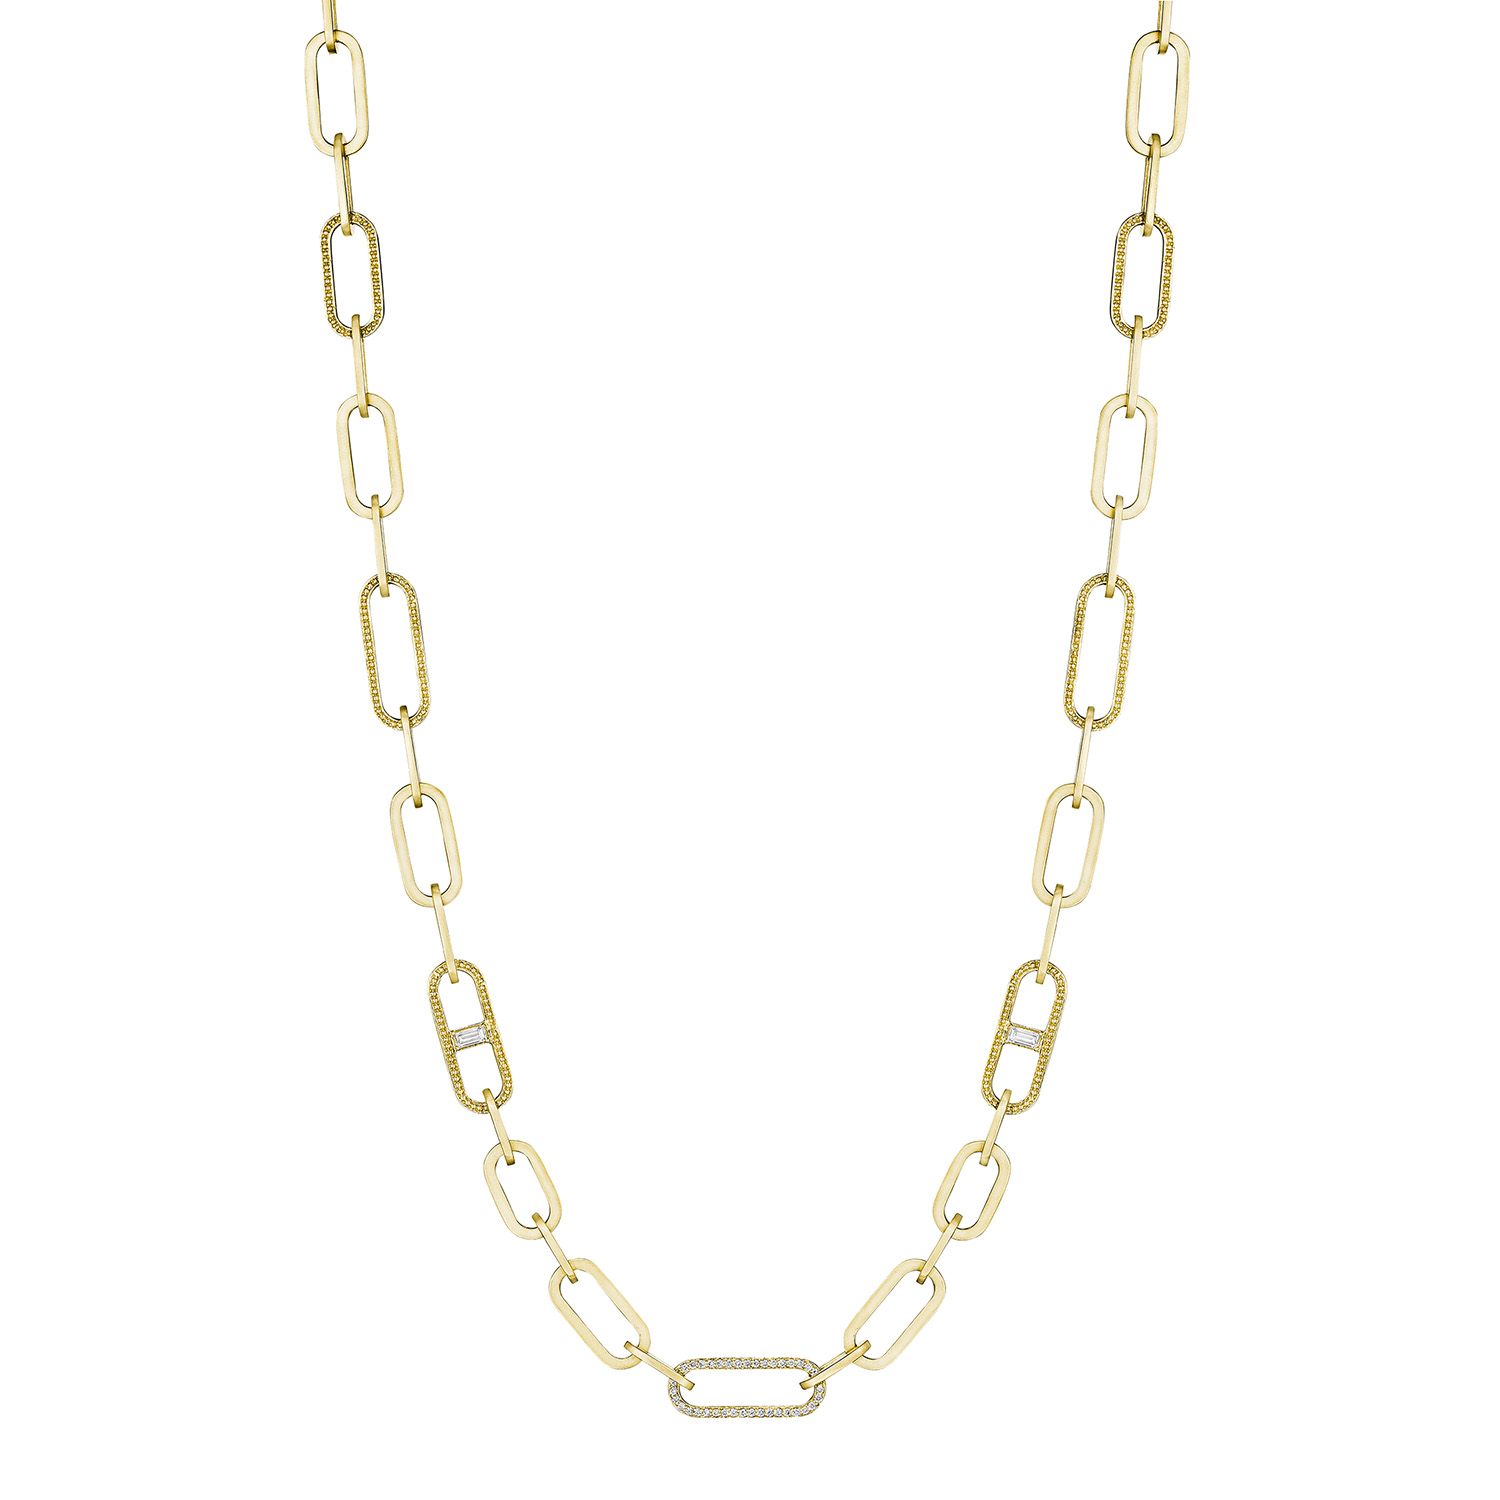 Penny Preville 18k yellow gold plain and beaded large link necklace with hidden clasp, 17"